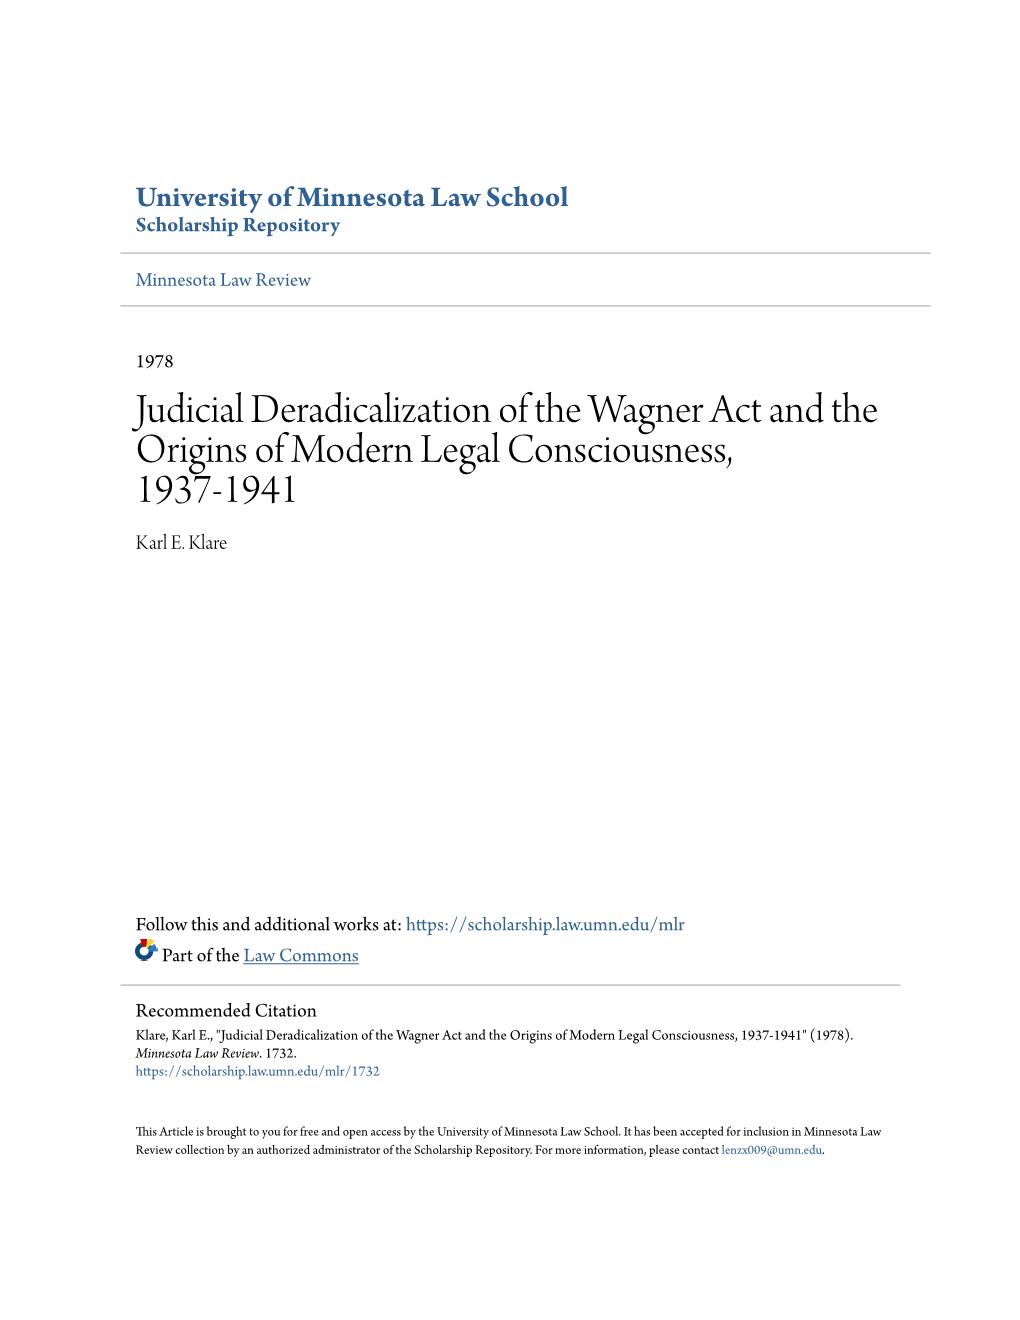 Judicial Deradicalization of the Wagner Act and the Origins of Modern Legal Consciousness, 1937-1941 Karl E